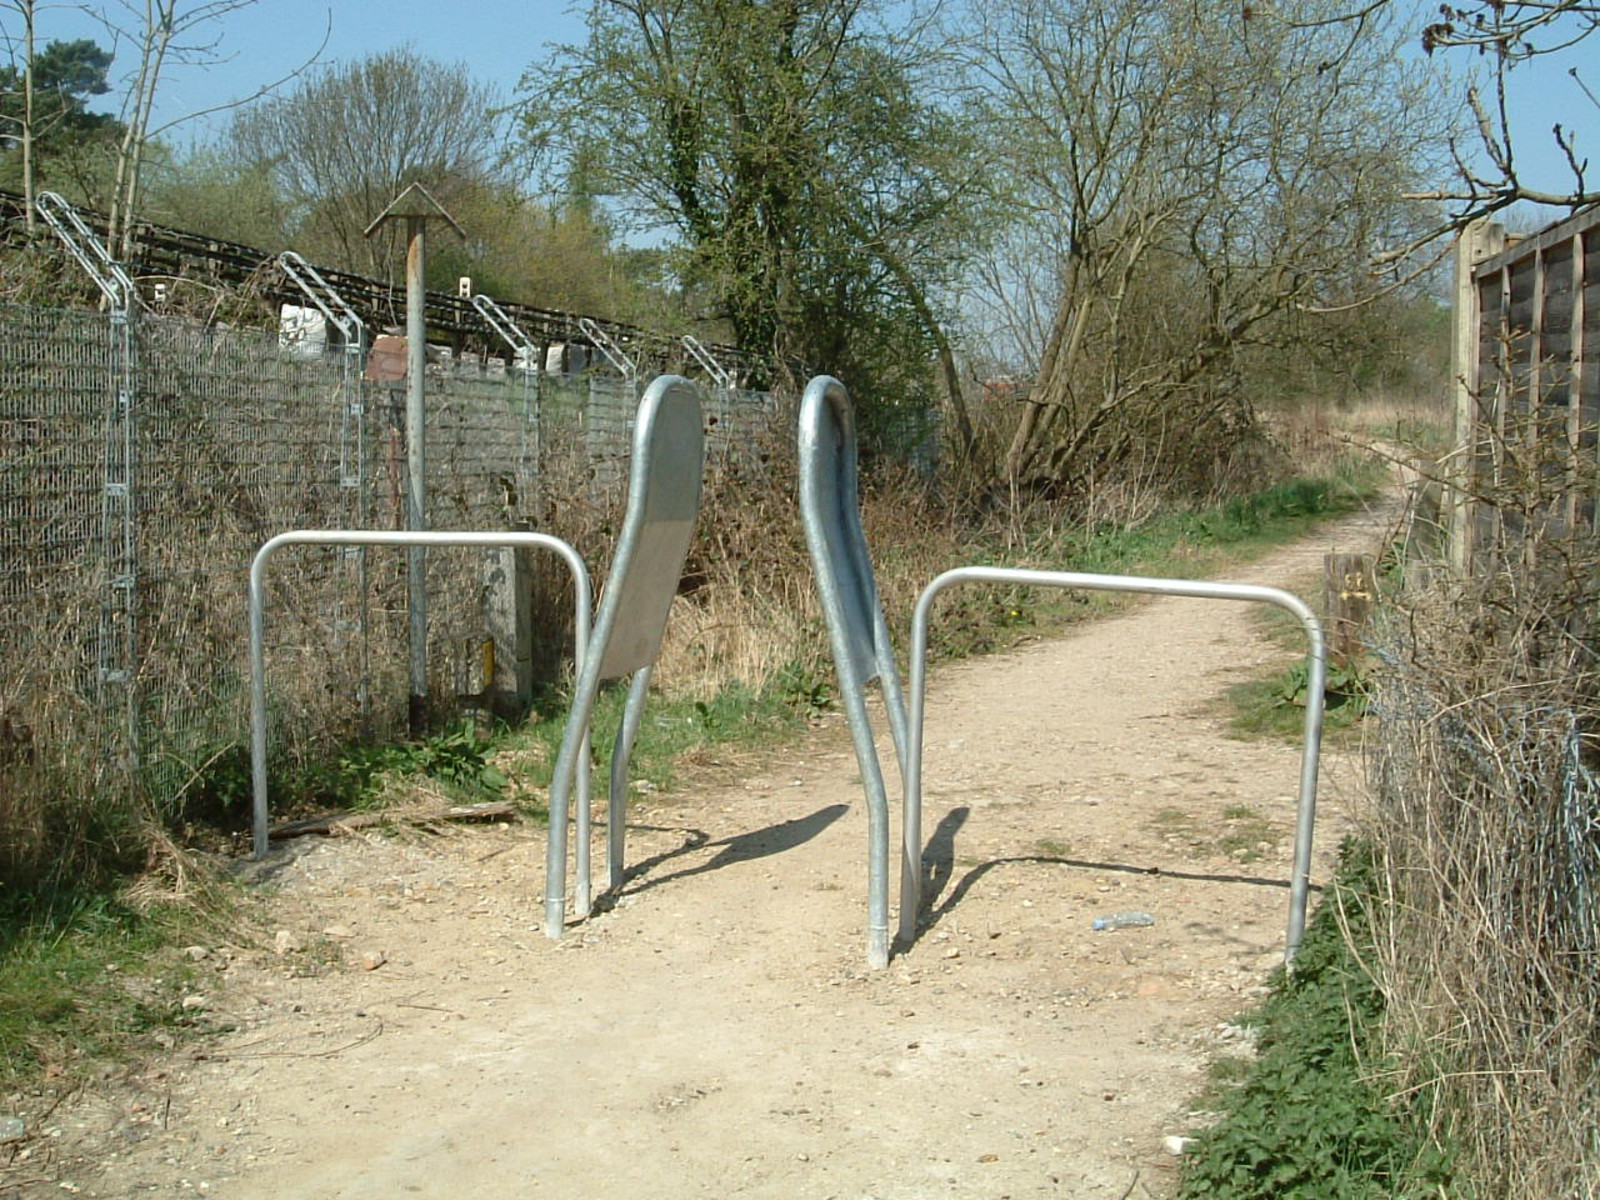 A bicycle gate